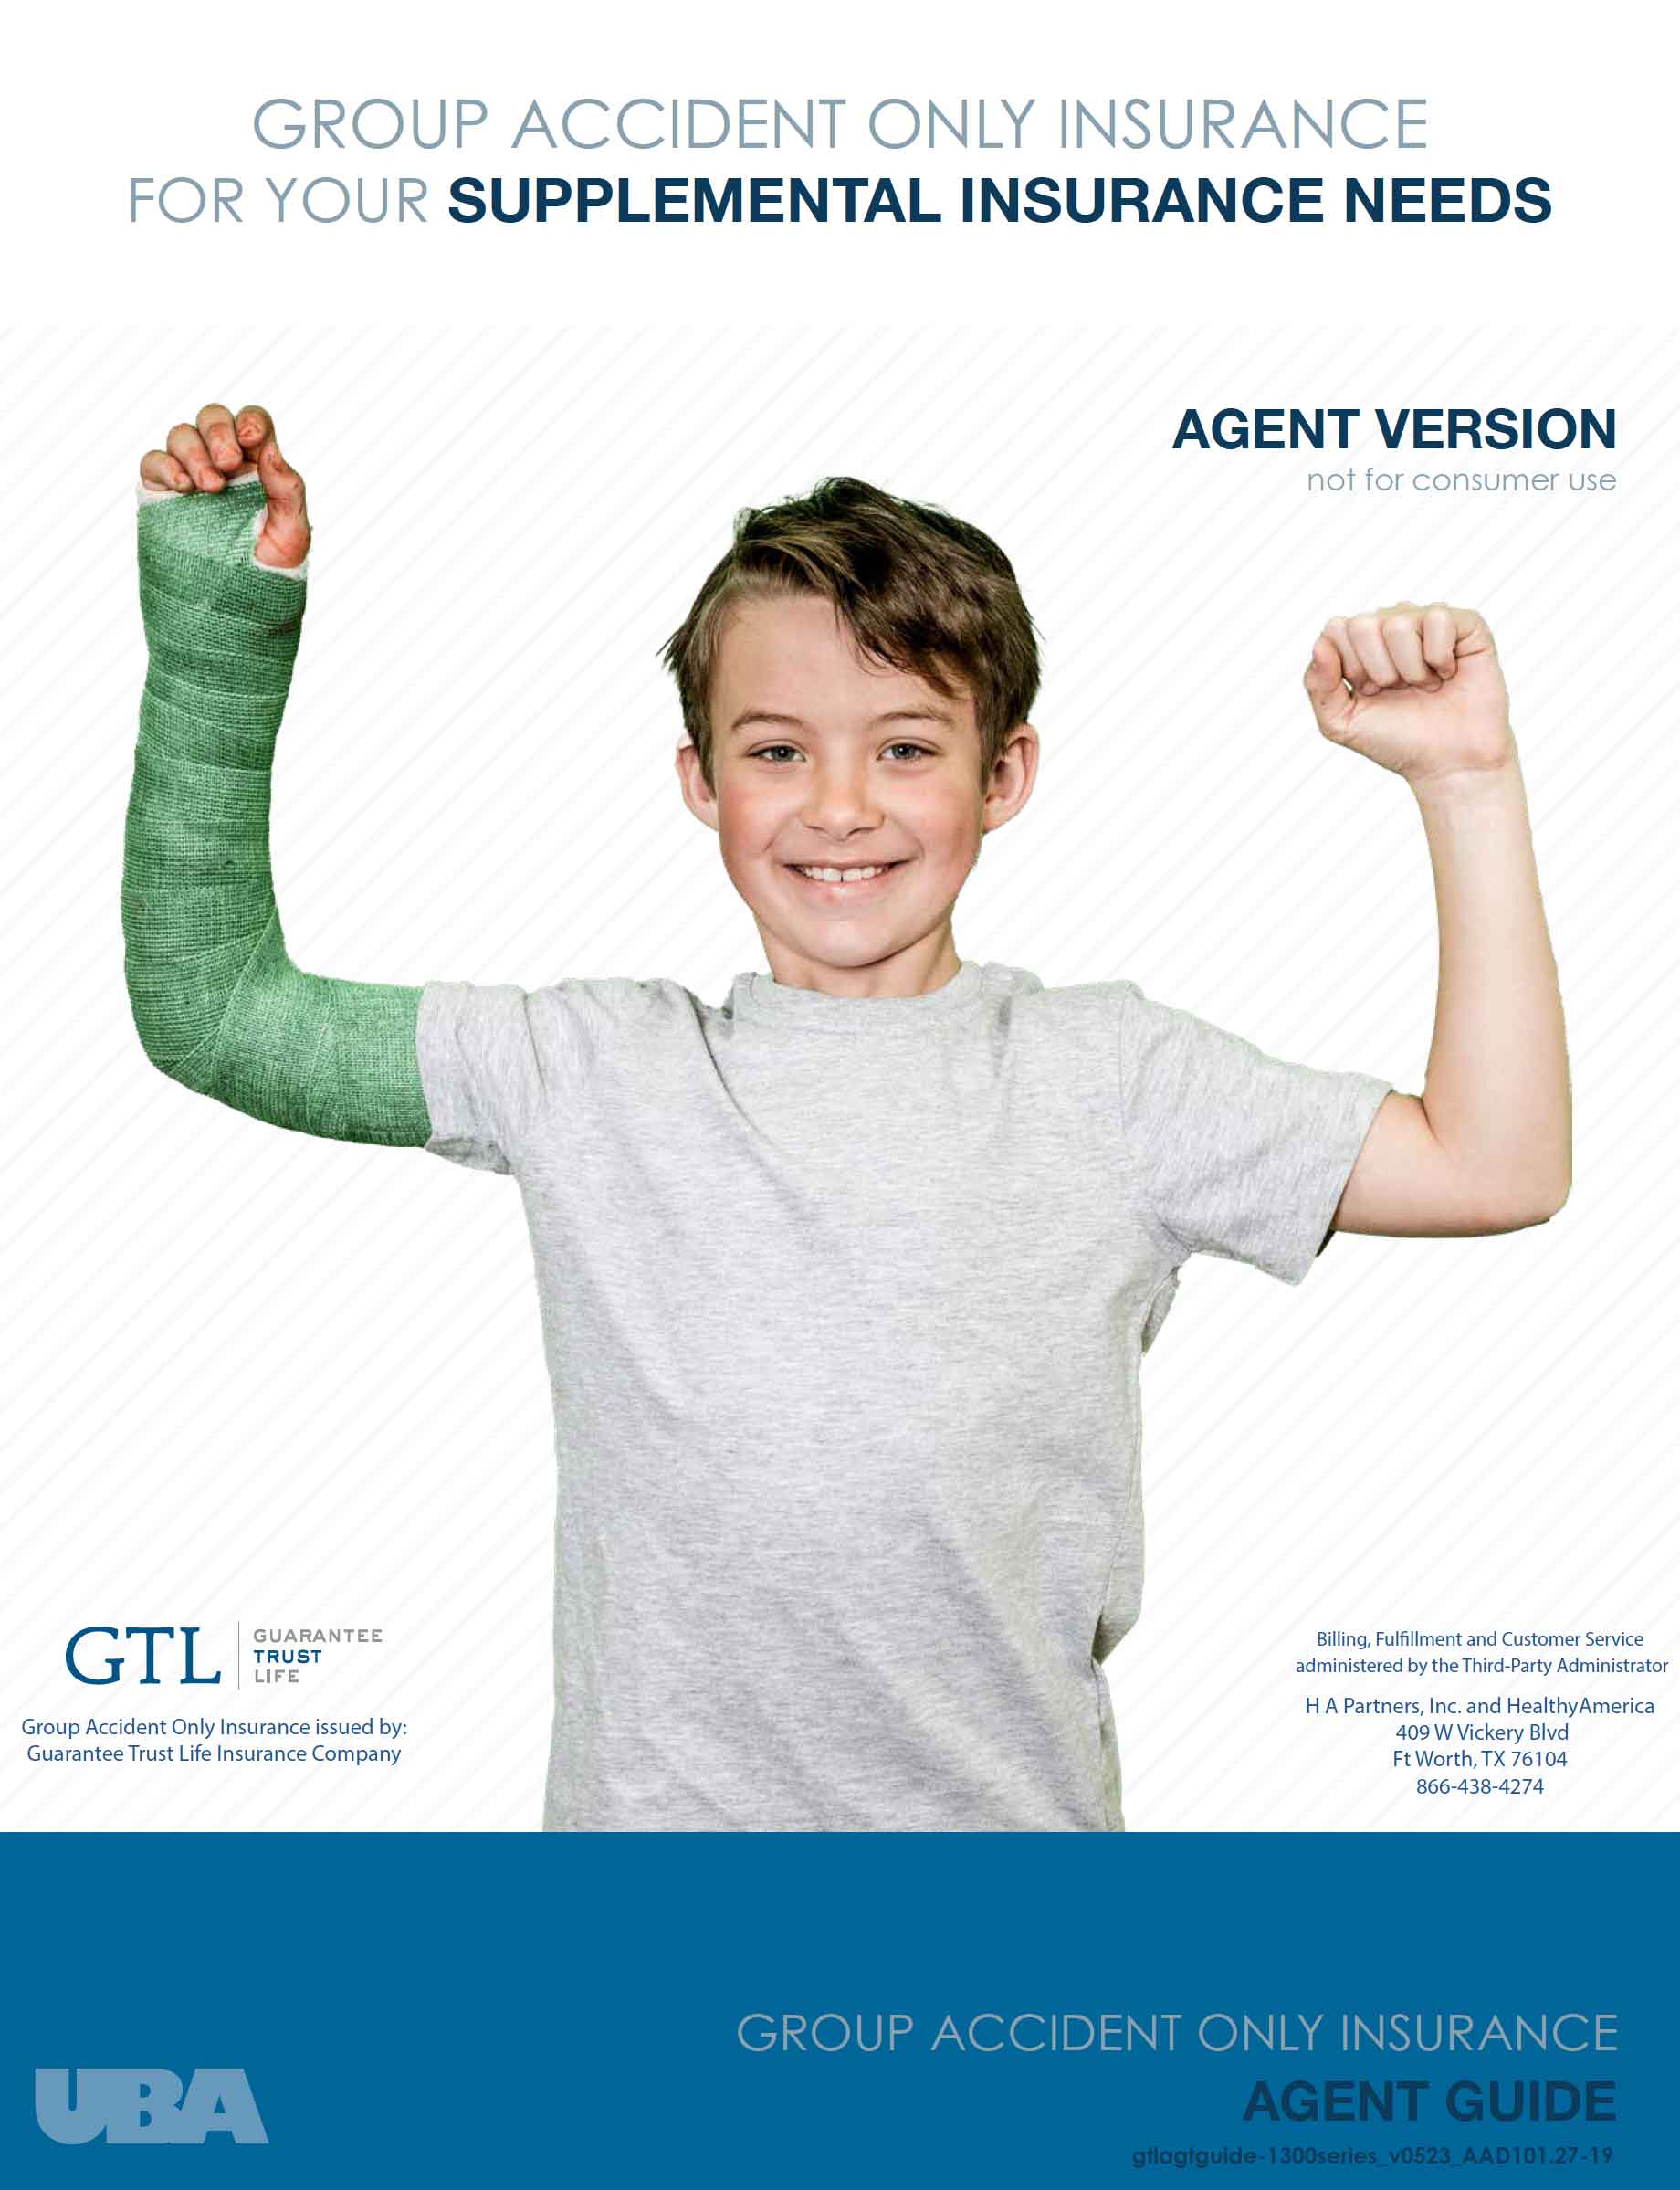 GTL Accident 1300 Agent Guide